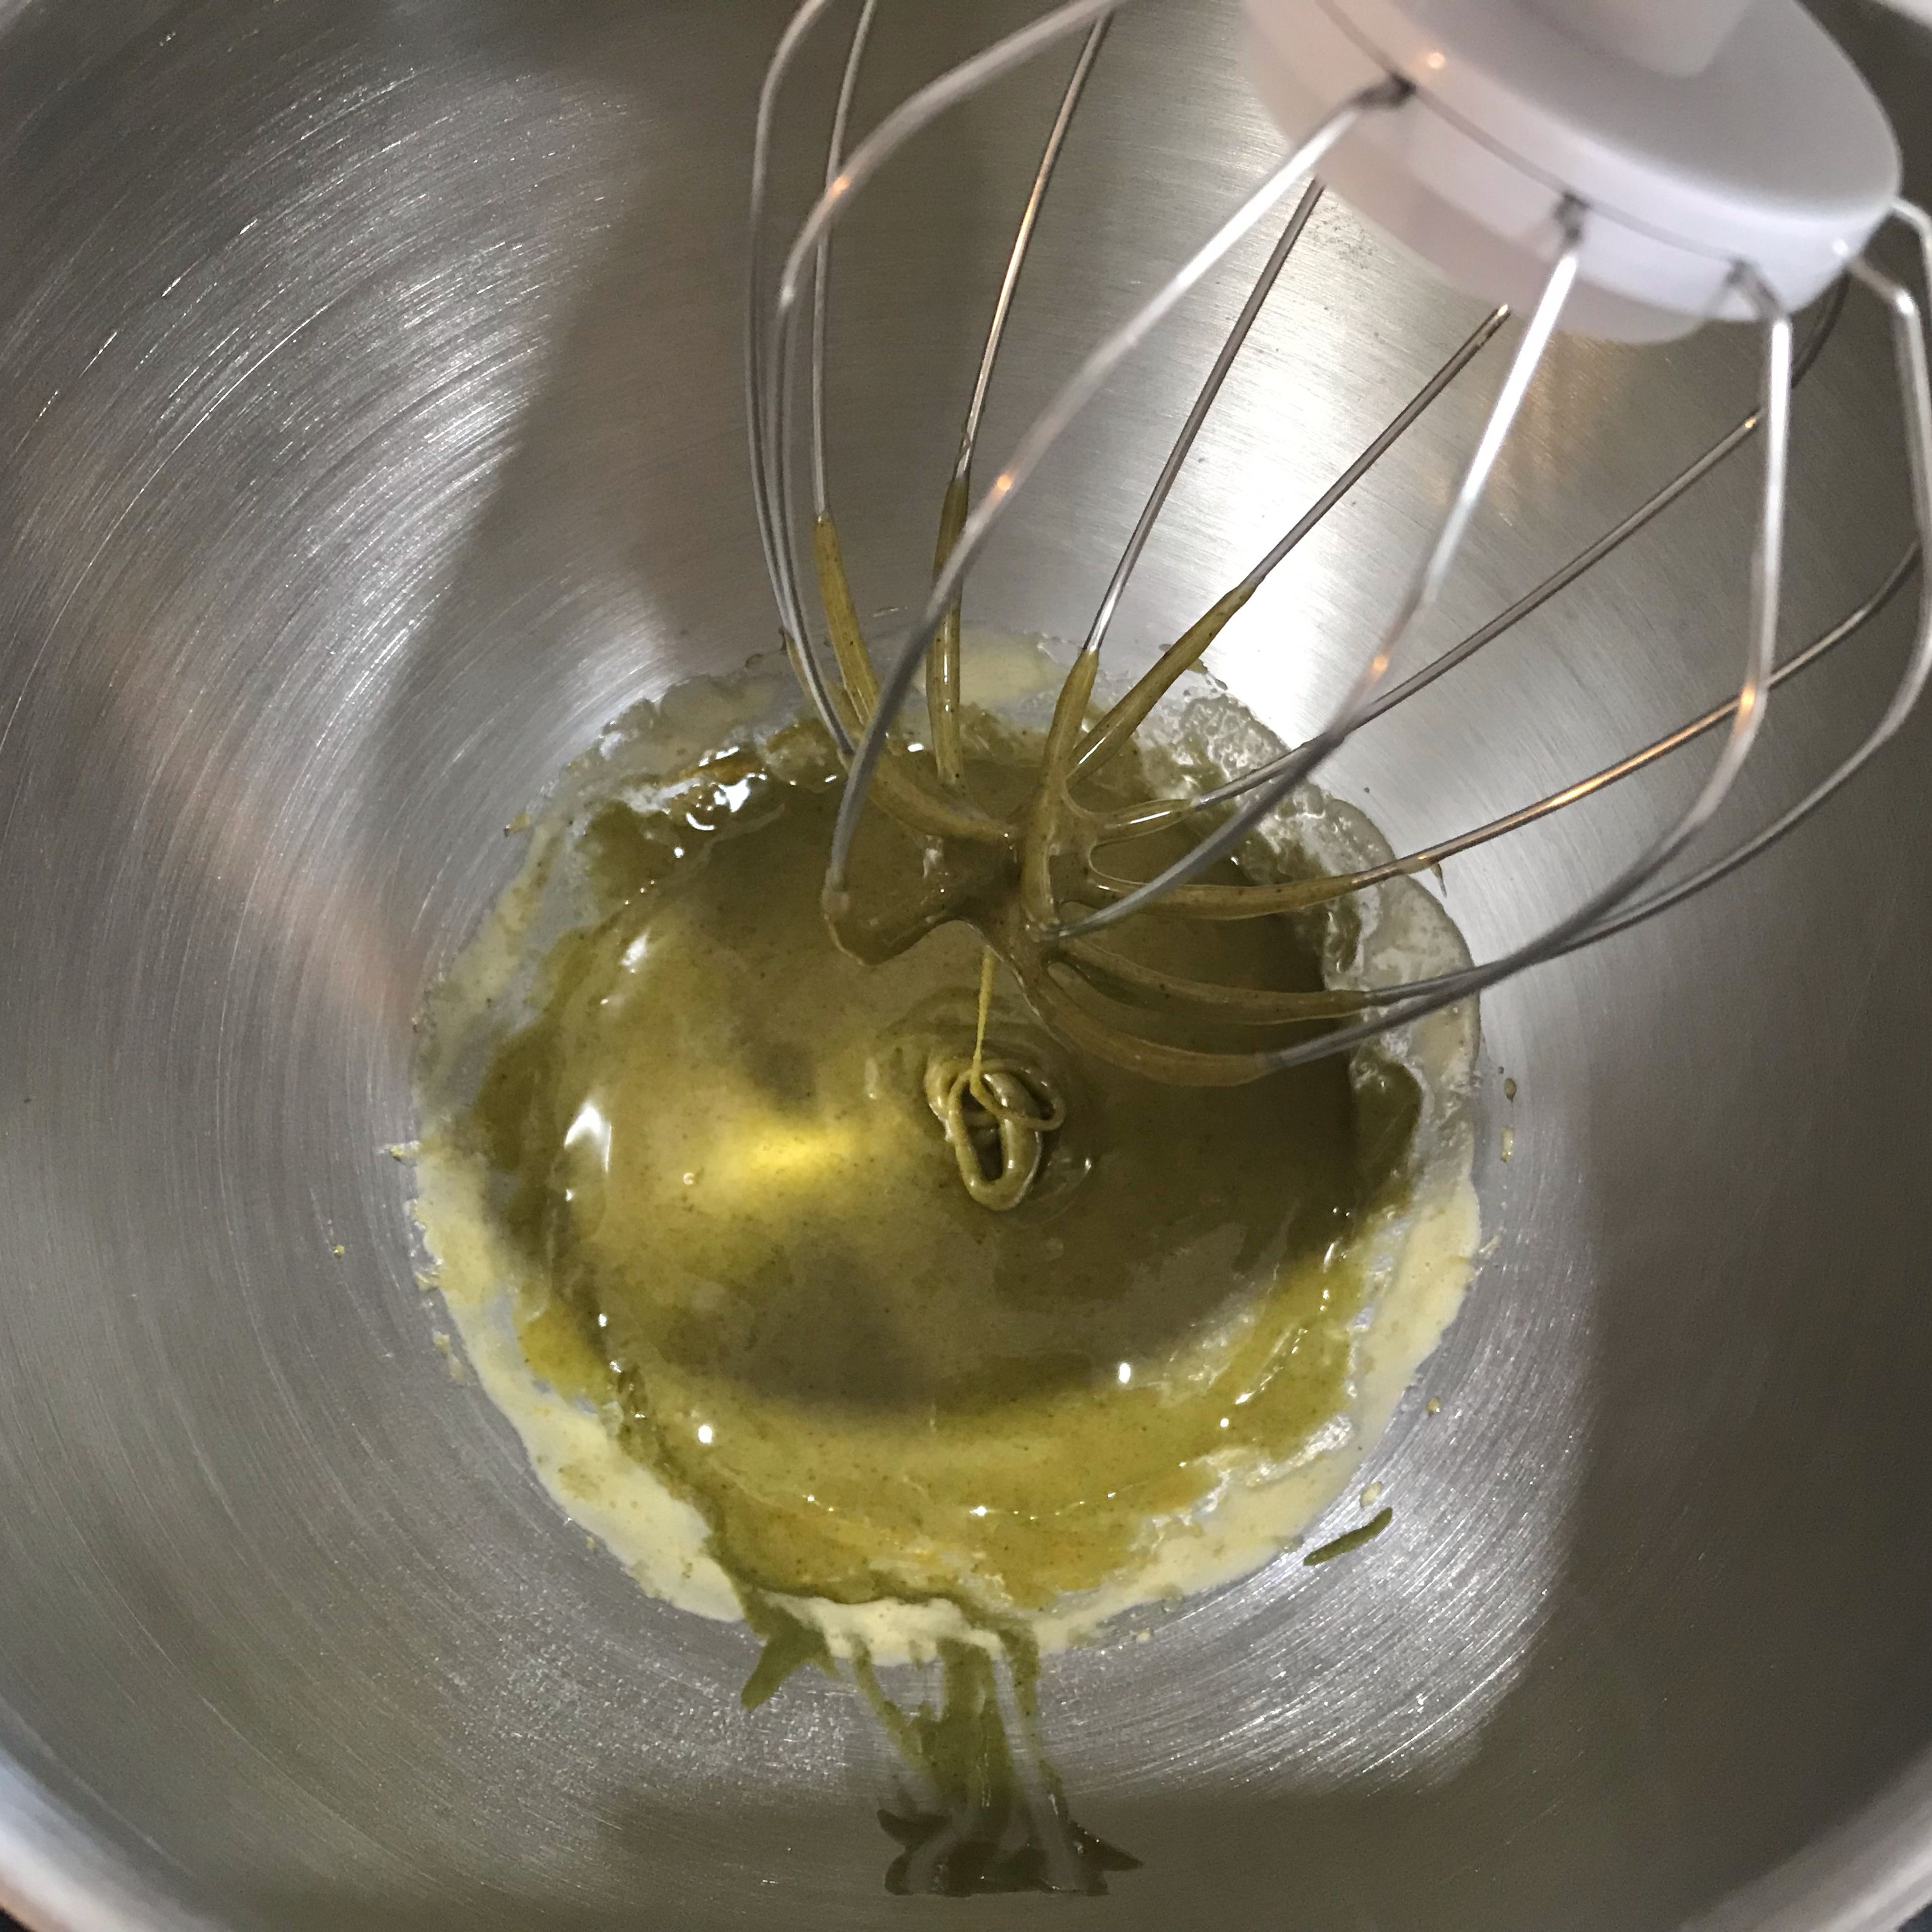 Add the pistachio paste and whisk until combined.